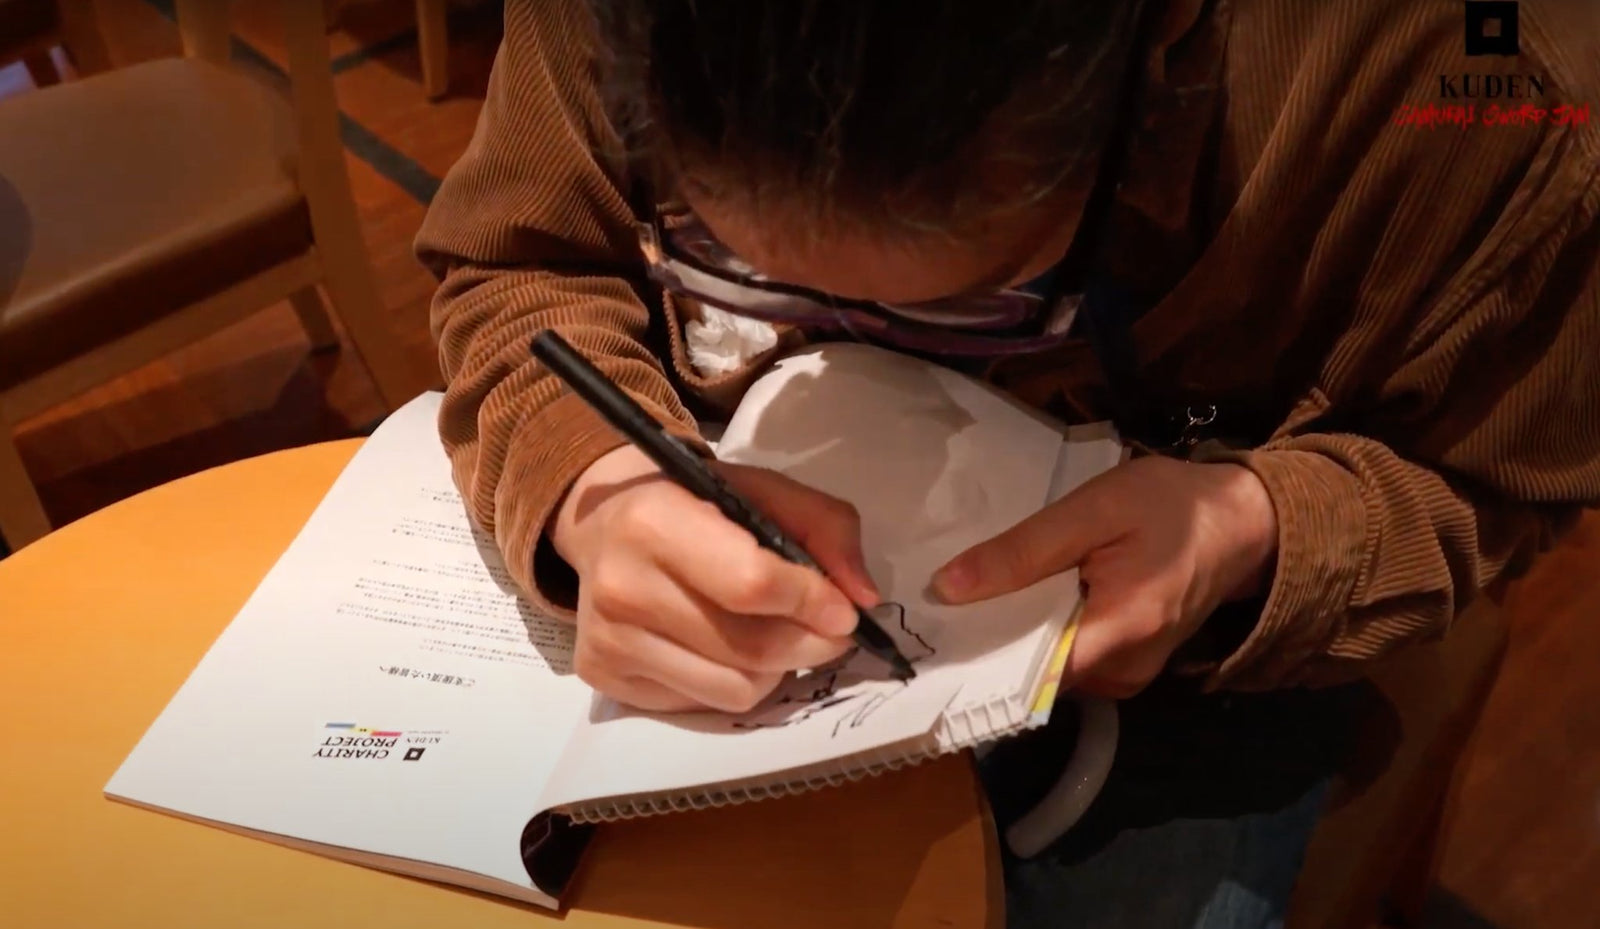 Live drawing sigh&Illustration by Mr.Shijoh&Ms.Hinomoto - KUDEN by TAKAHIRO SATO